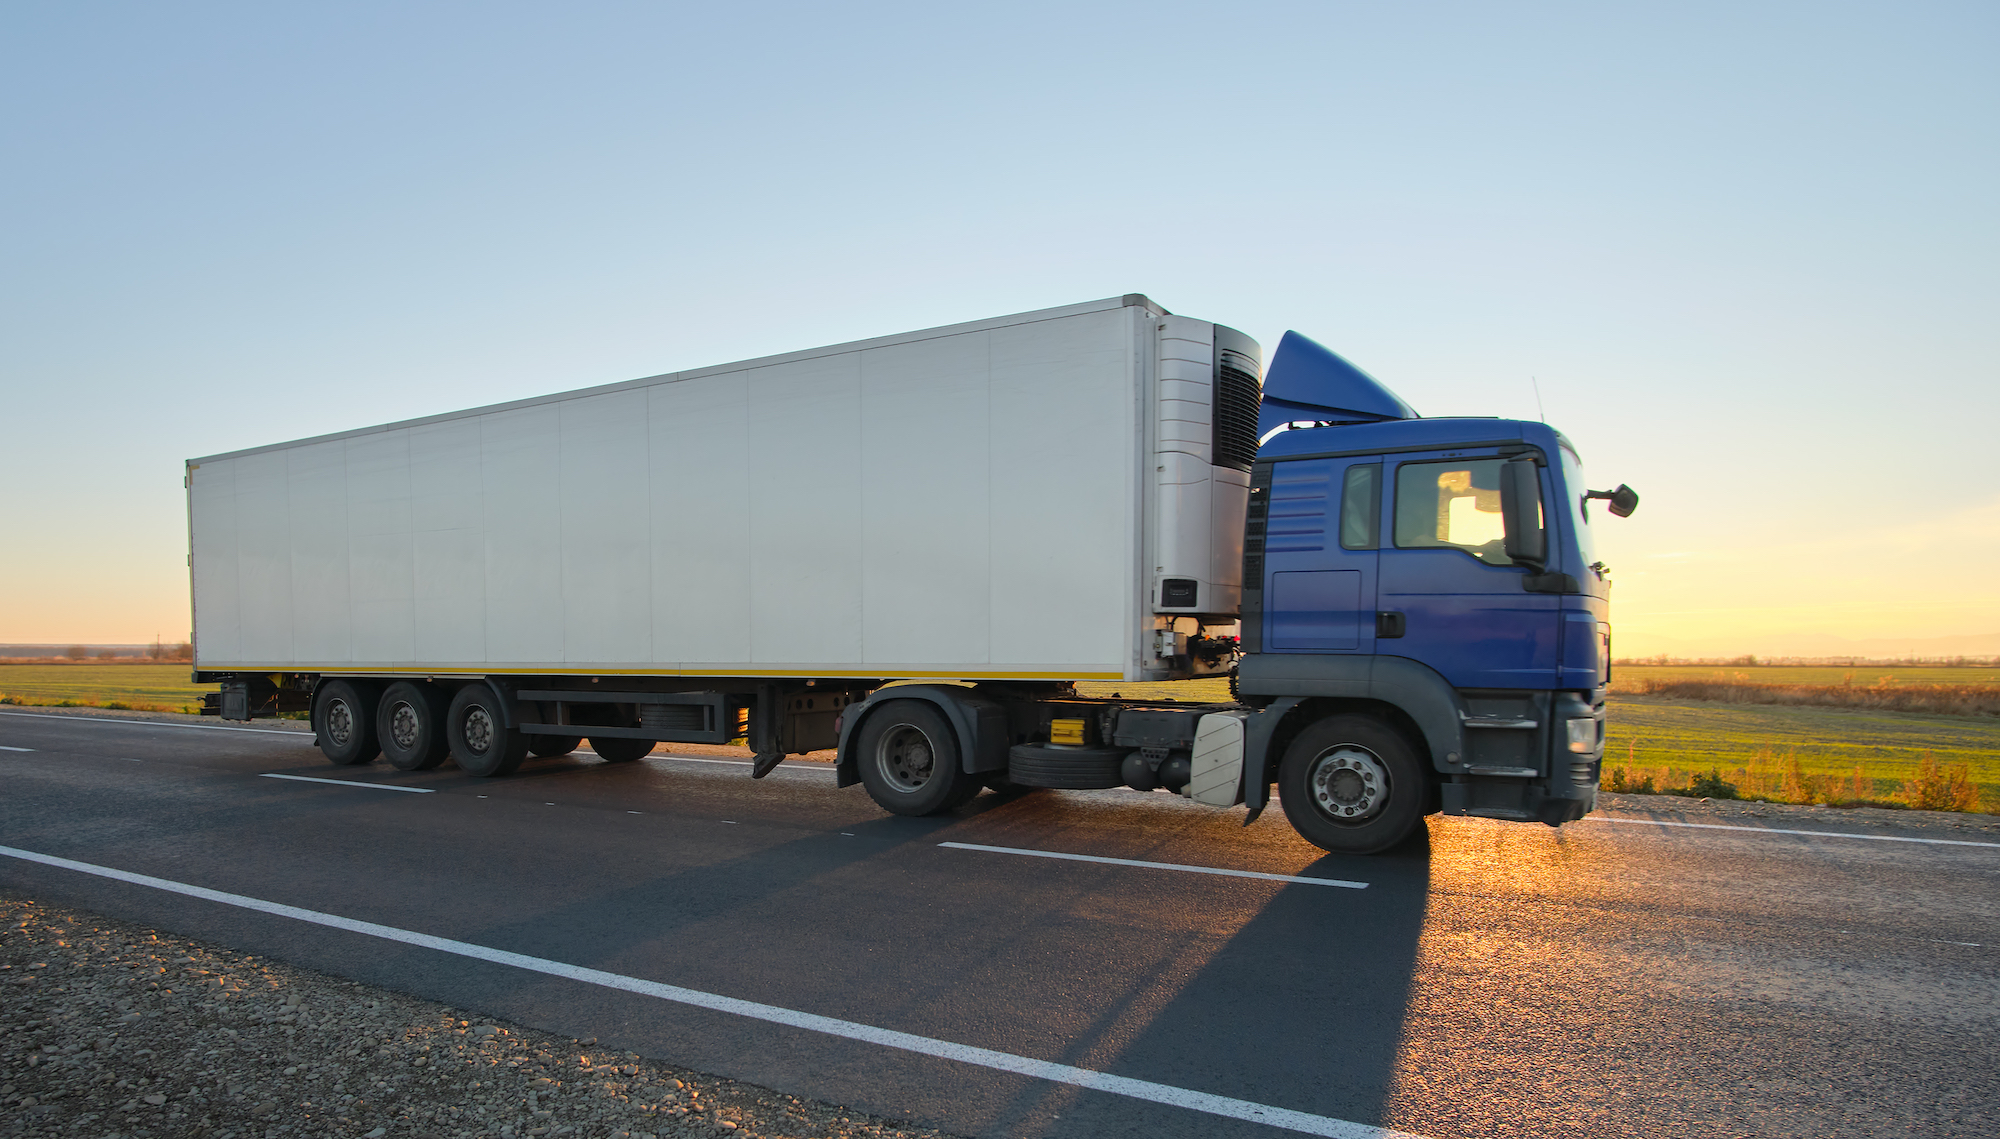 Semi Truck With Cargo Trailer Driving On Highway Hauling Goods In Evening. Delivery Transportation And Logistics Concept